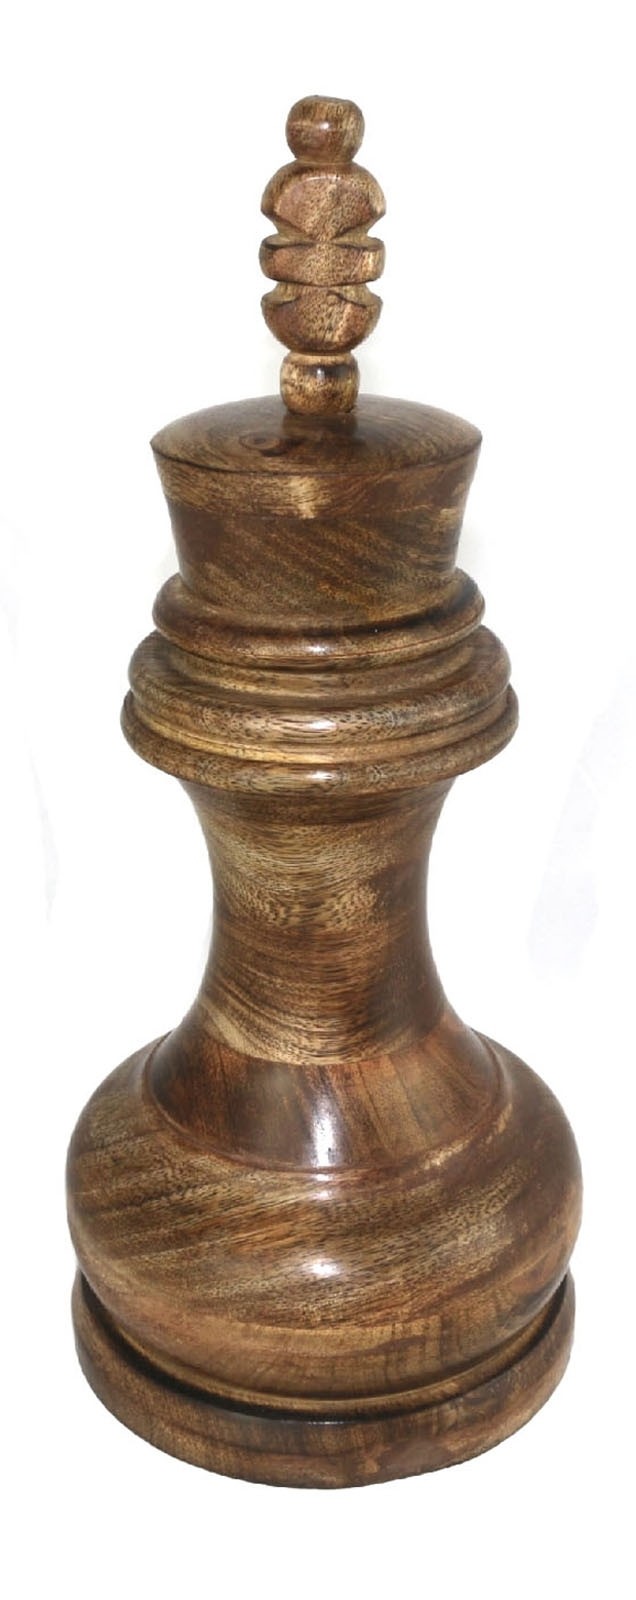 Wooden King Chess Piece 40cm